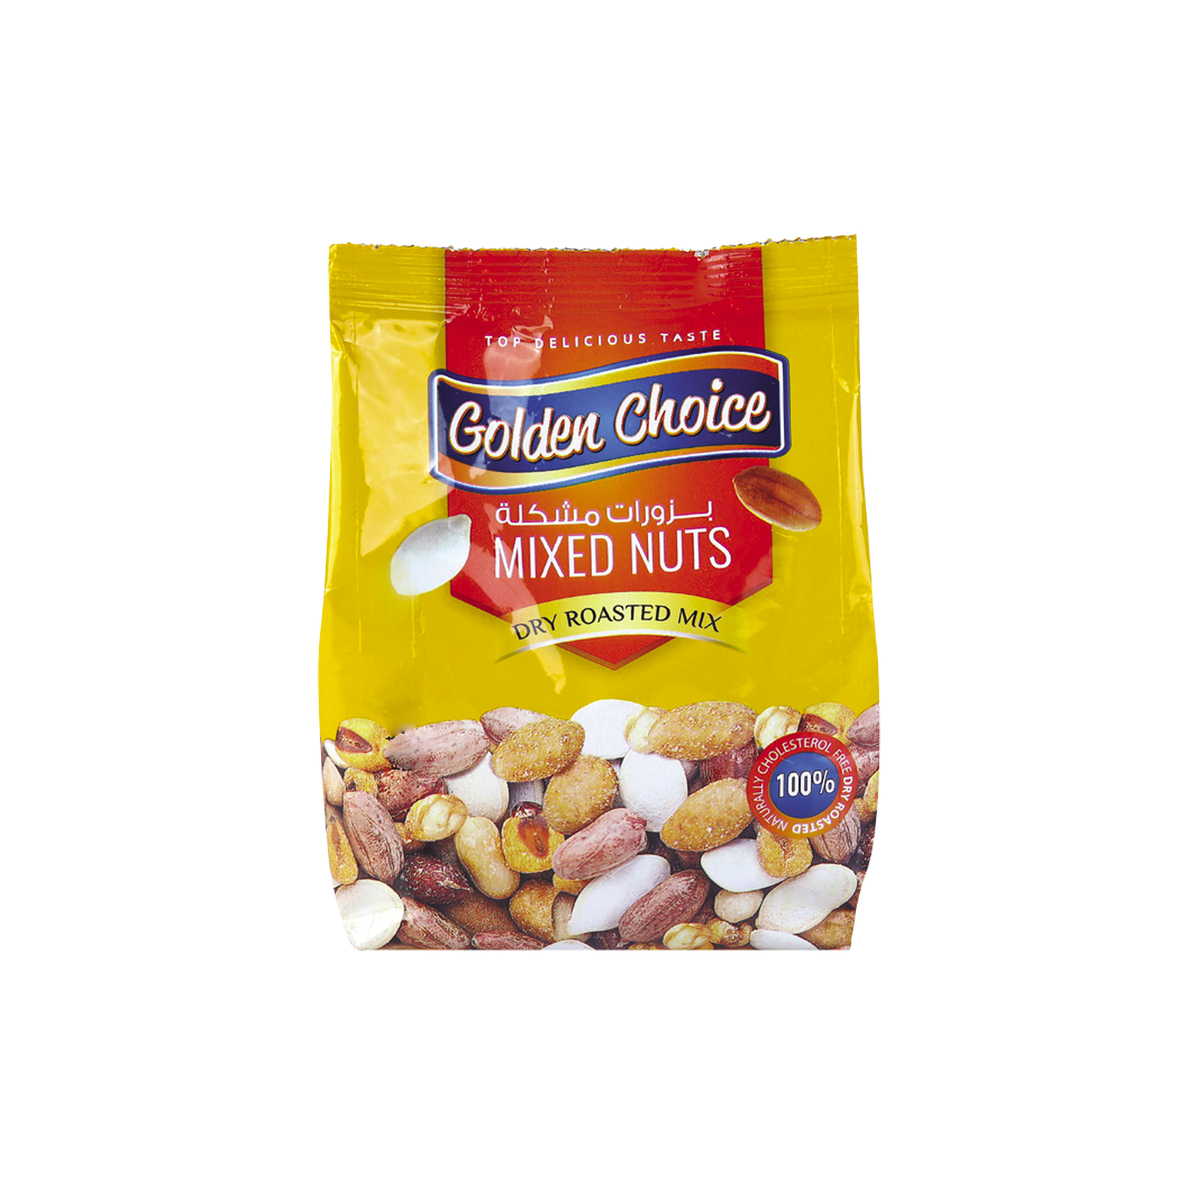 Golden Choice Mixed Nuts 300g